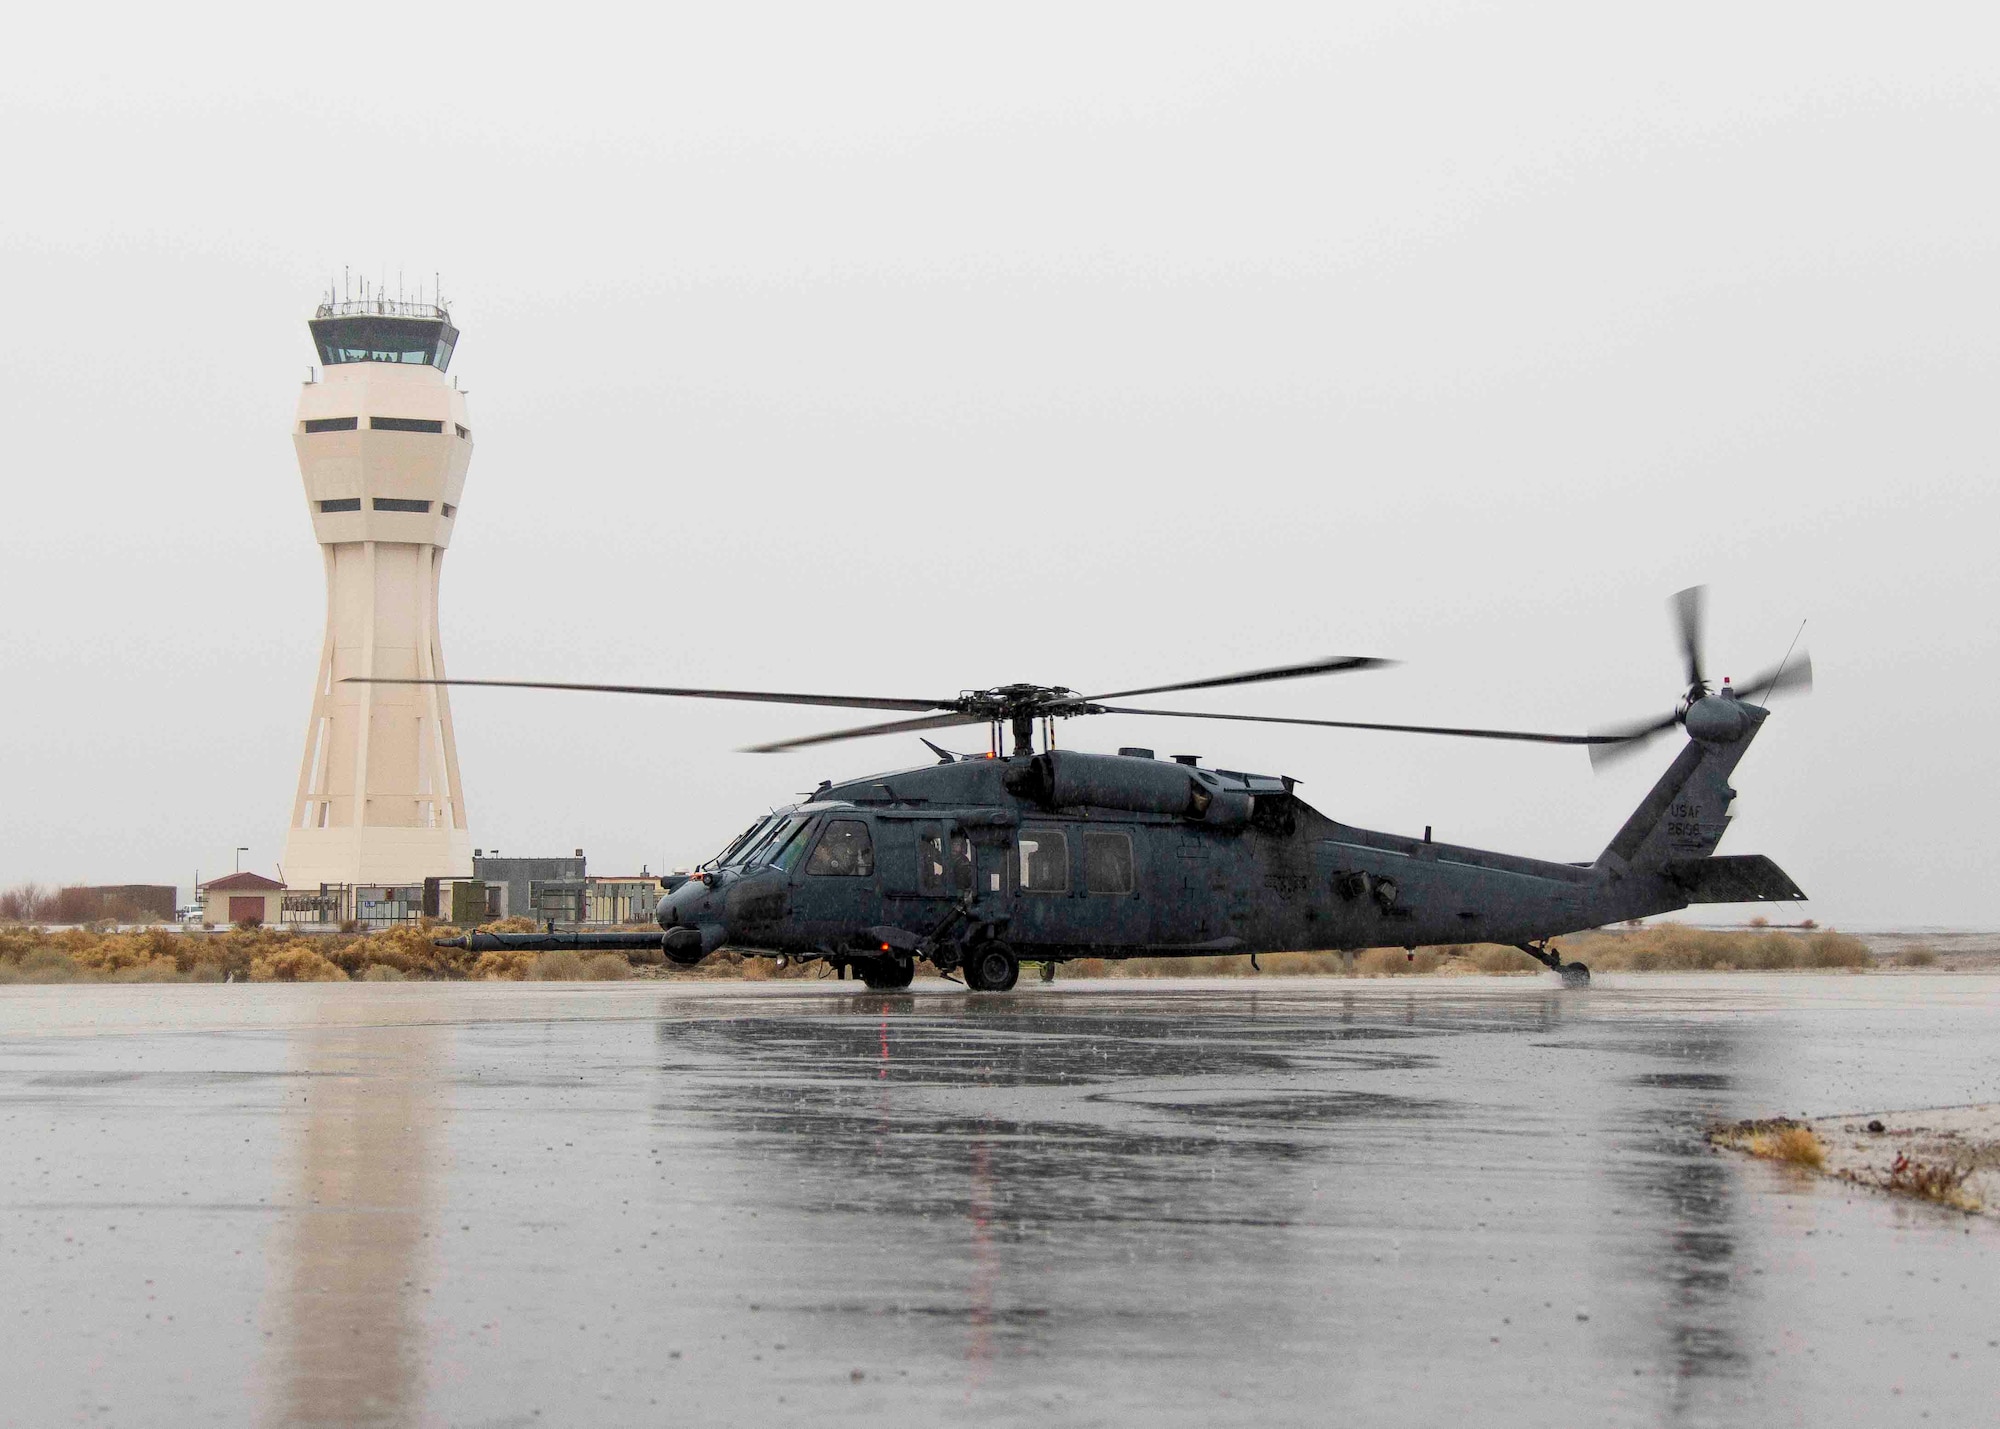 A Pave Hawk is a variant of the UH-60 Blackhawk used by the U.S. Army. Its primary objective is Combat Search and Rescue. The combat crew of four includes the pilot, copilot and two special mission aviators as well as three Air Force pararescue men for rescue operations.(U.S. Air Force photo by Christopher Okula) 
